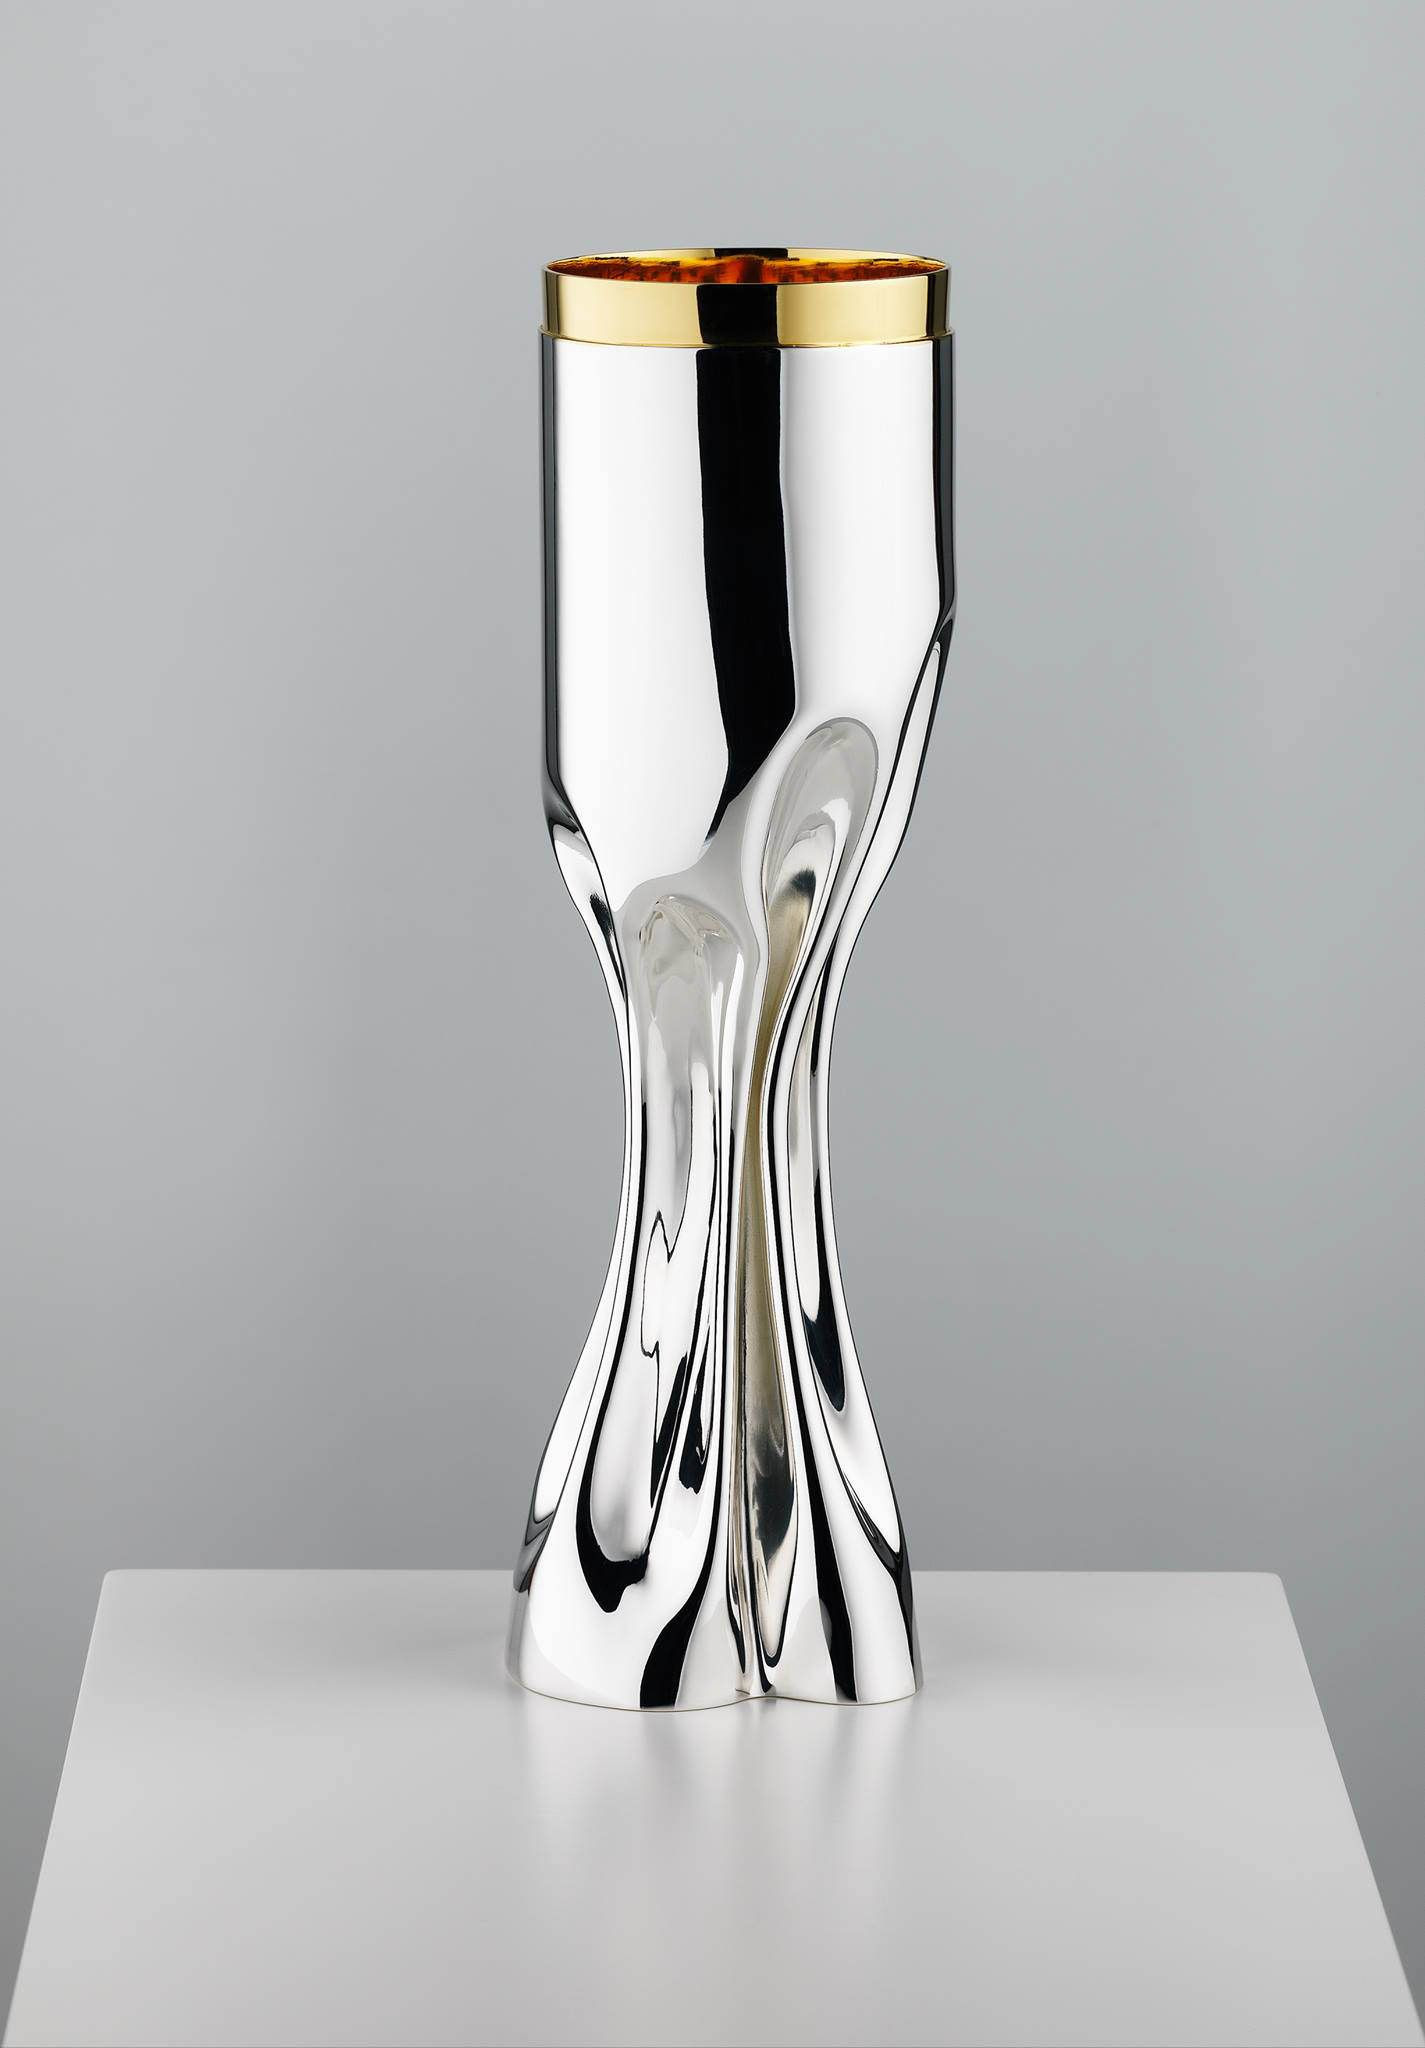 25 Awesome Gold Plated Flower Vases 2024 free download gold plated flower vases of naomi scott draped goblet naomi scott and abstract sculpture with regard to naomi scott draped goblet britannia silver and gold plated interior photography shanno